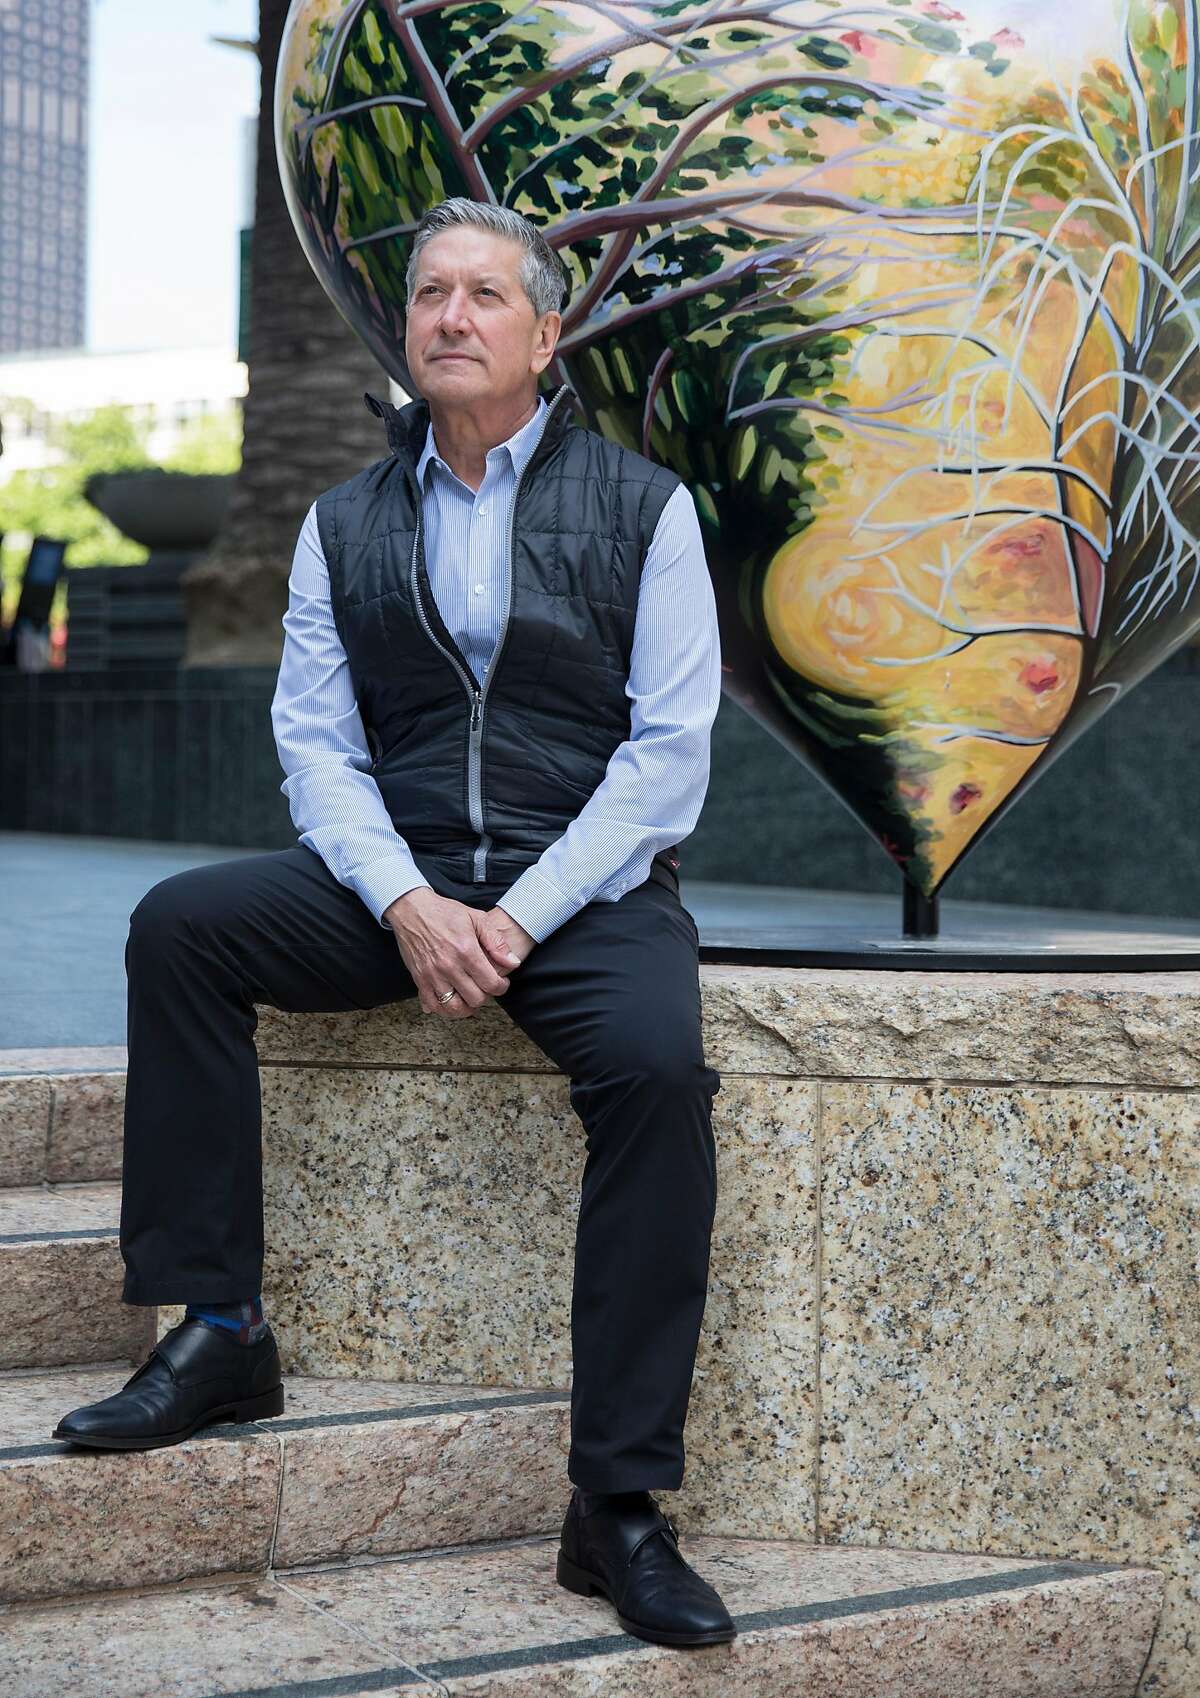 Joe D'Alessandro, head of SF Travel, poses for a portrait near Union Square in San Francisco, Calif. Tuesday, May 7, 2019.